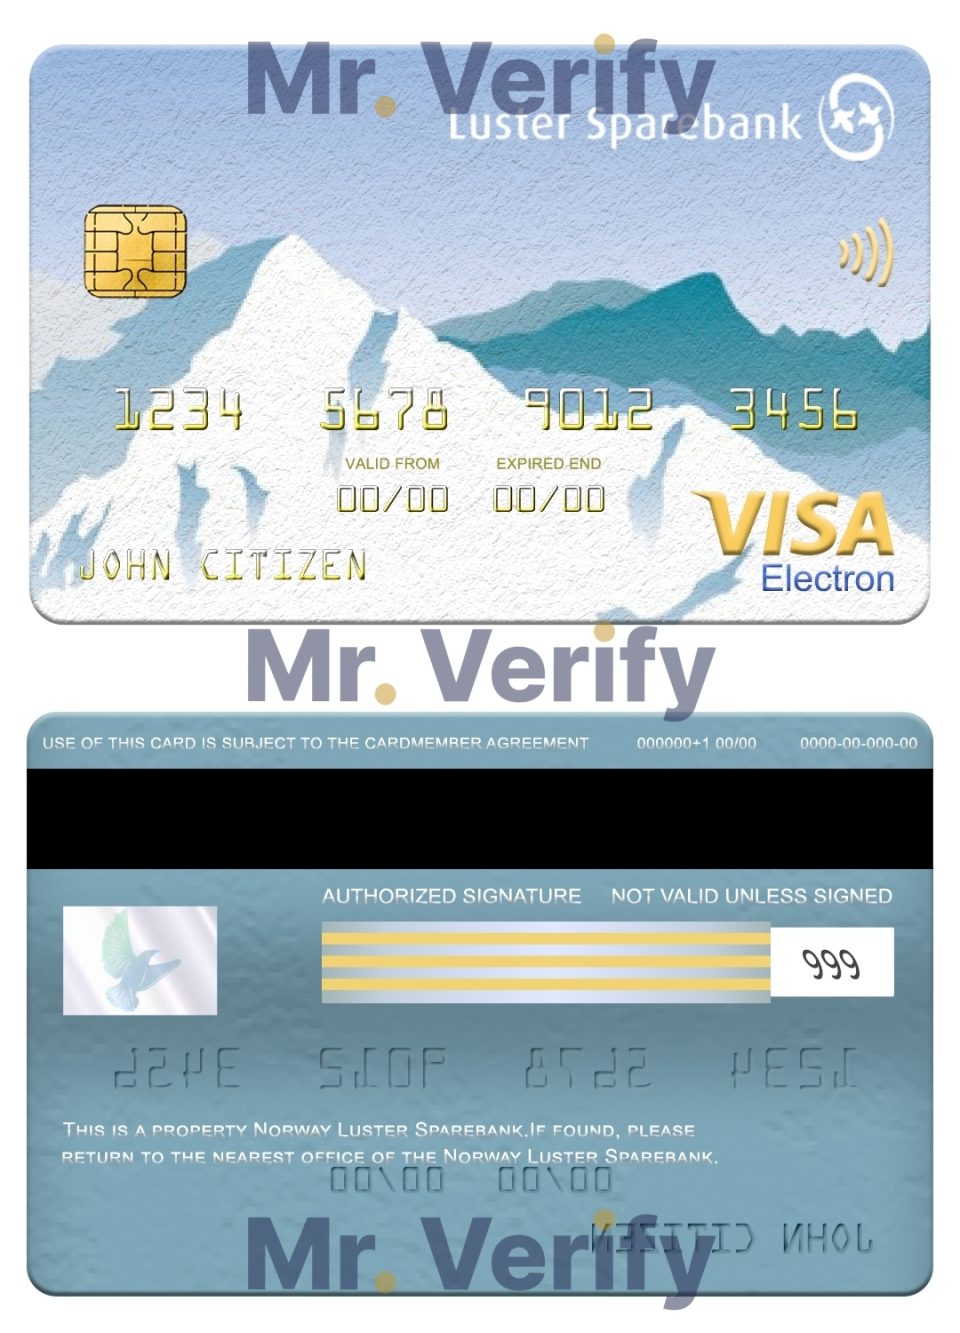 Fillable Norway Luster Sparebank visa electron card Templates | Layer-Based PSD